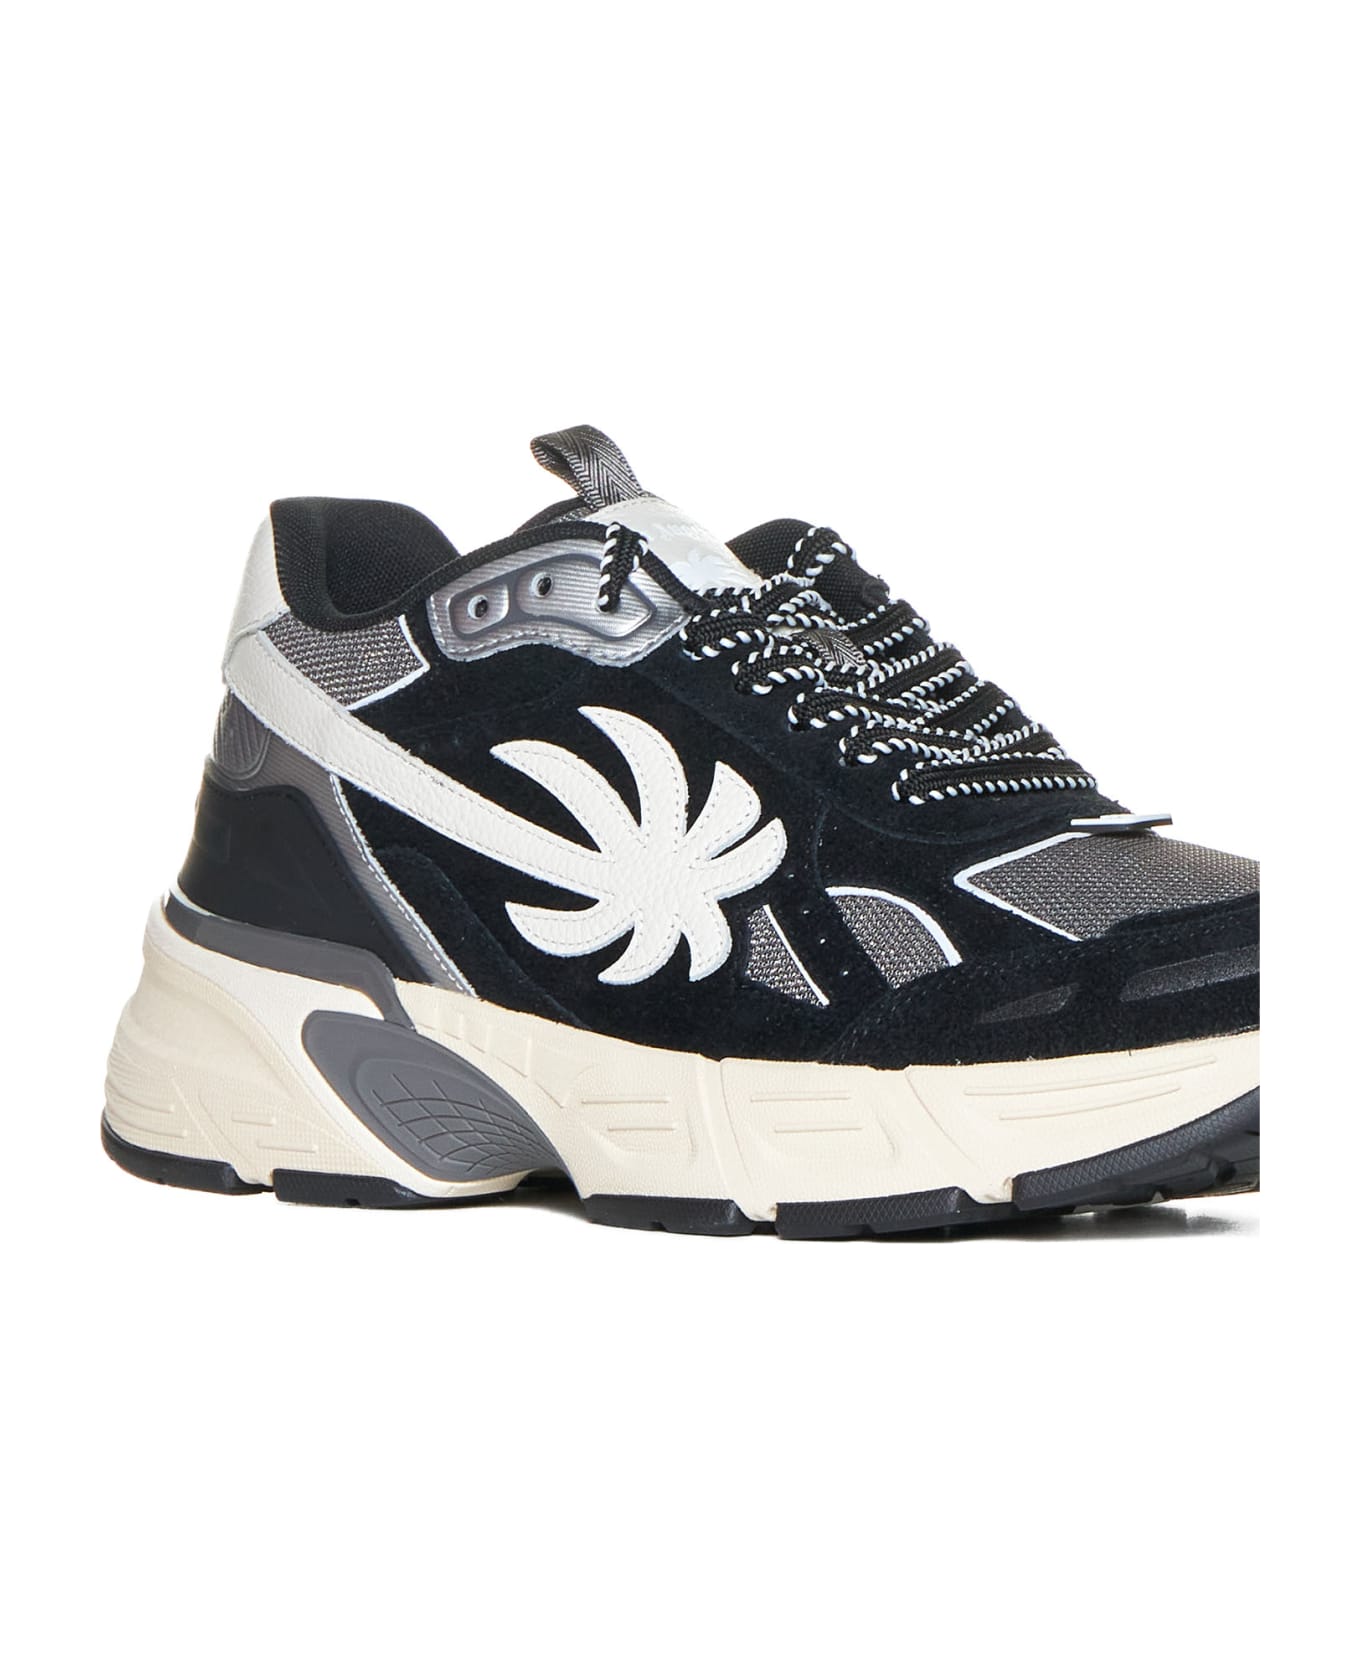 Palm Angels The Palm Runner Sneakers - Black Grey スニーカー